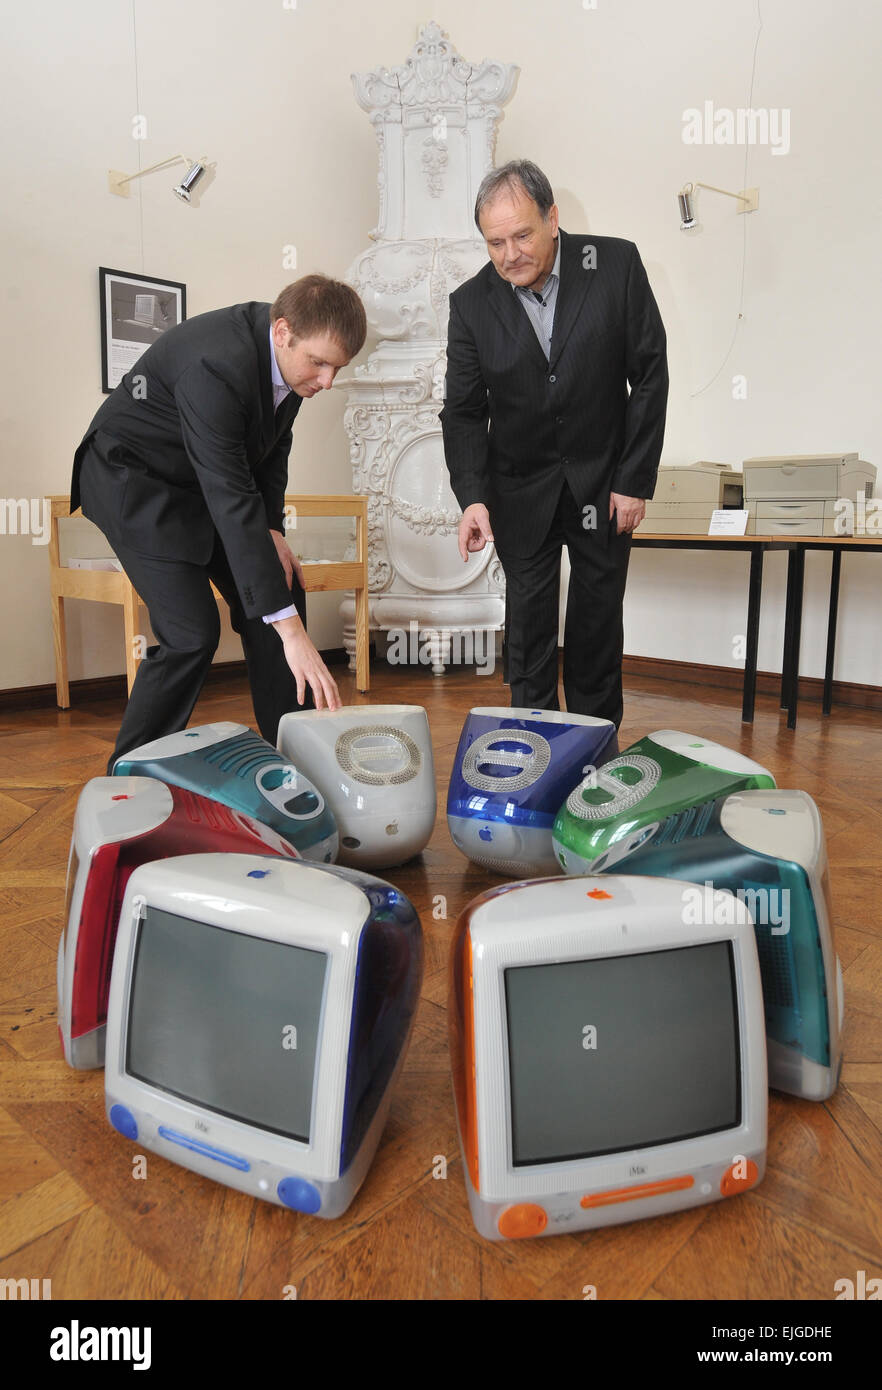 Start of exhibition of historical computers of US firm Apple, including rare computers like Apple Lisa, first Macintosh, Power Mac G4 Cube took place in chateau Slavkov - Austerlitz, Slavkov u Brna, Czech Republic, March 26, 2015. Pictured Pavel Malecek (left) and his father Bedrich Malecek, who take care of a collection of computers. (CTK Photo/Igor Zehl) Stock Photo